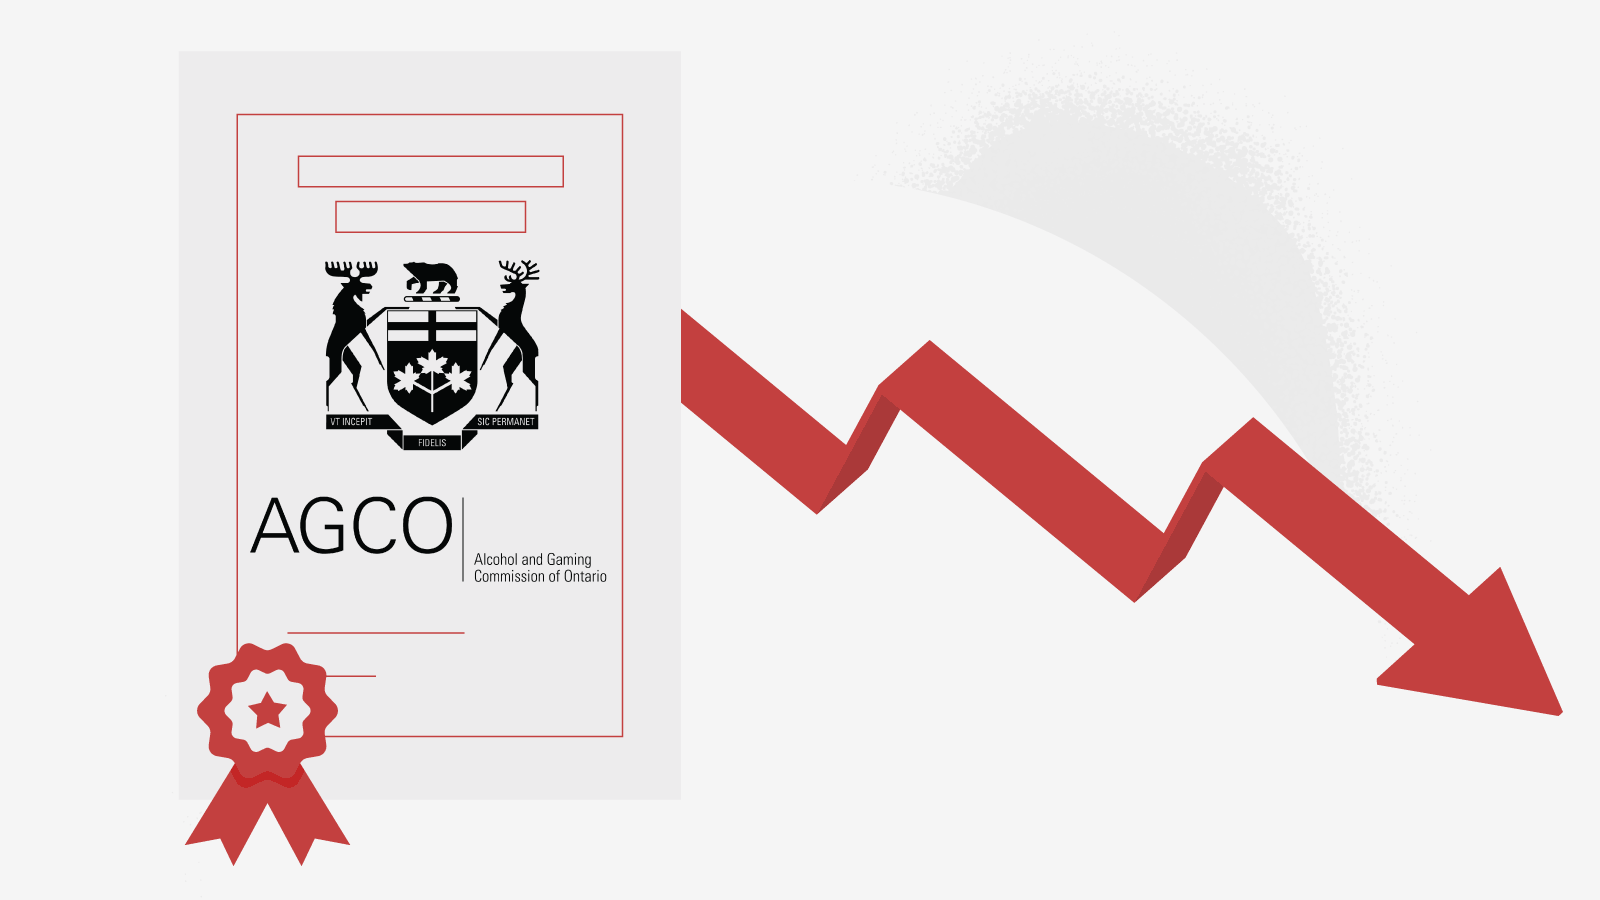 The AGCO license reduced newly depositing players by 40%